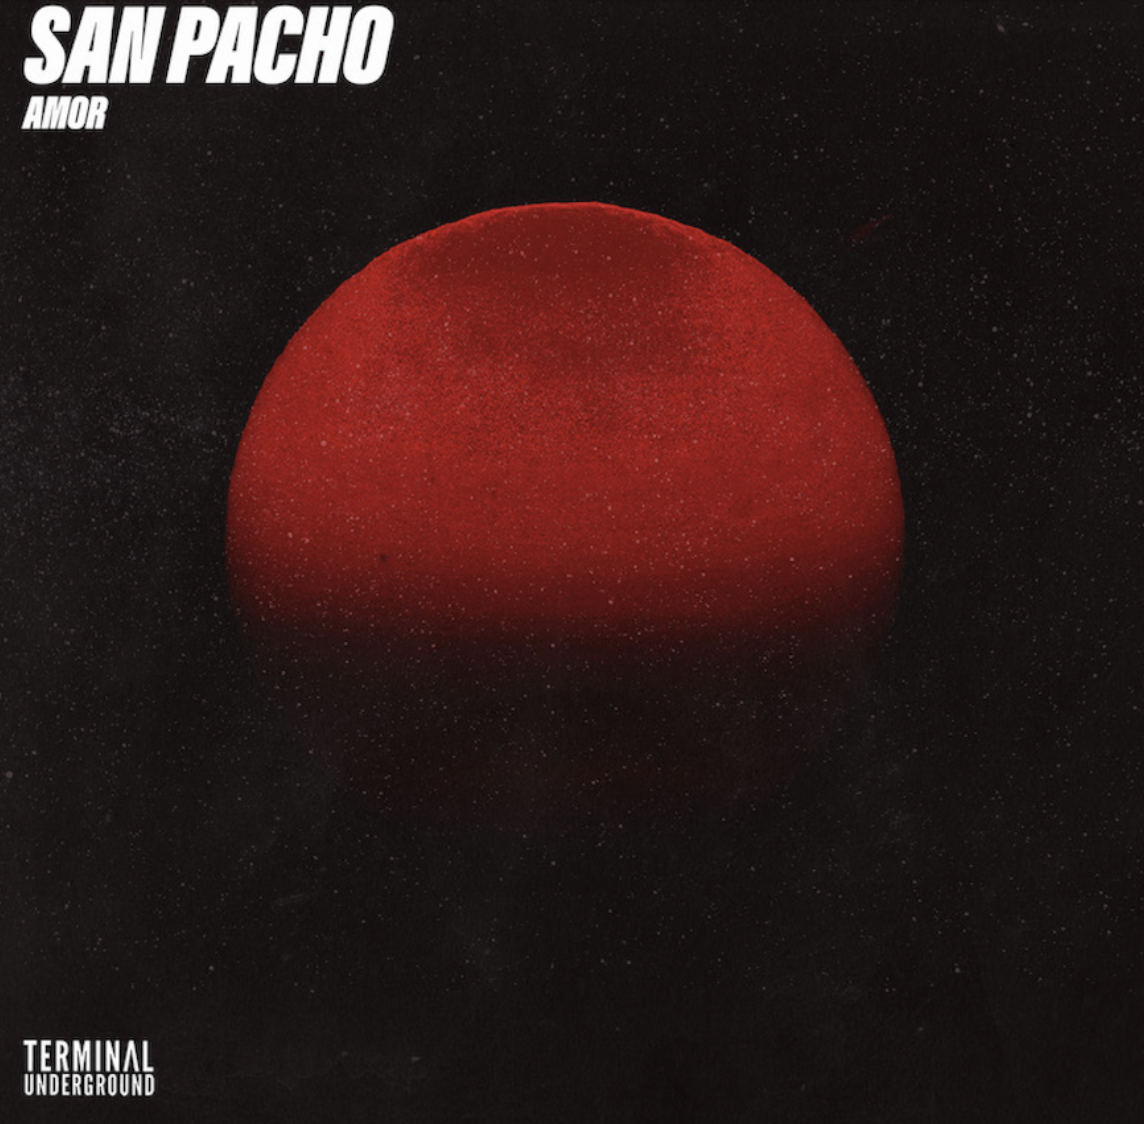 San Pacho Delivers Red Hot Latin House Single “Amor” on Terminal Underground